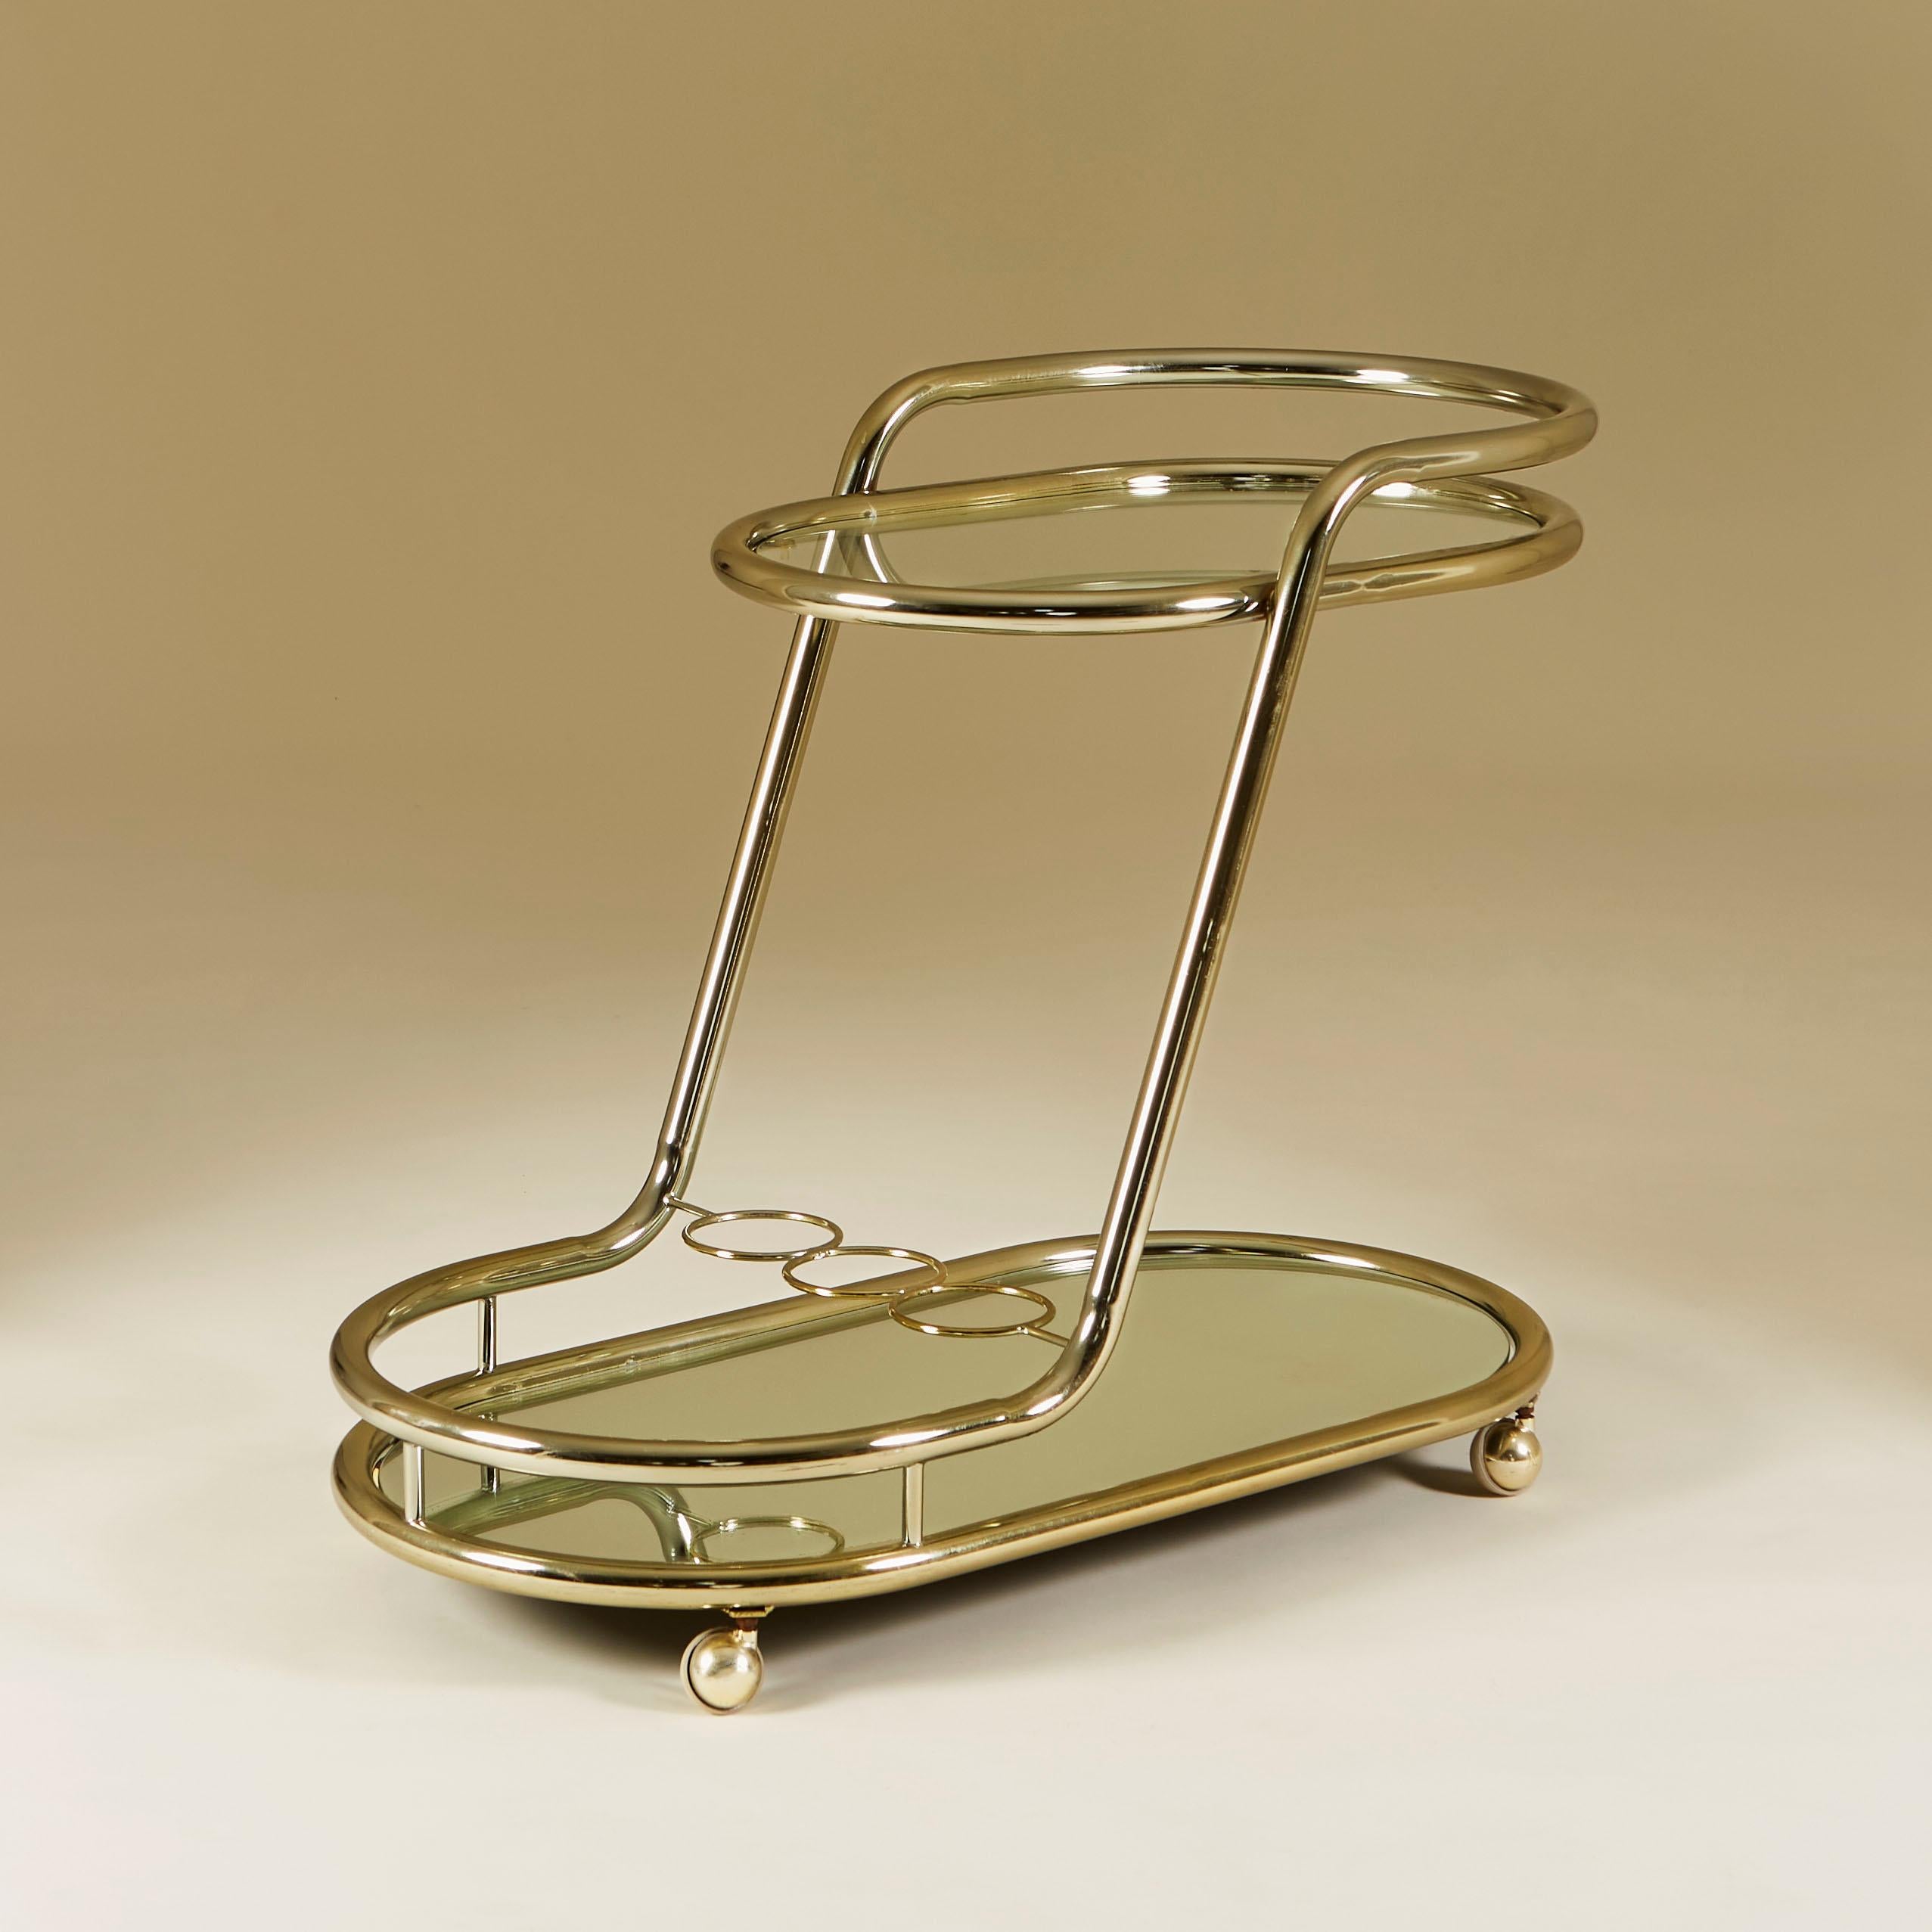 Chic pale golden brass trolley with simple tubular design to form decorative frame and handle. Gives the illusion of a floating top tier. Glass upper shelf and mirrored base shelf. Simple brass bottle holder for 3 bottles. Sits on golden castor